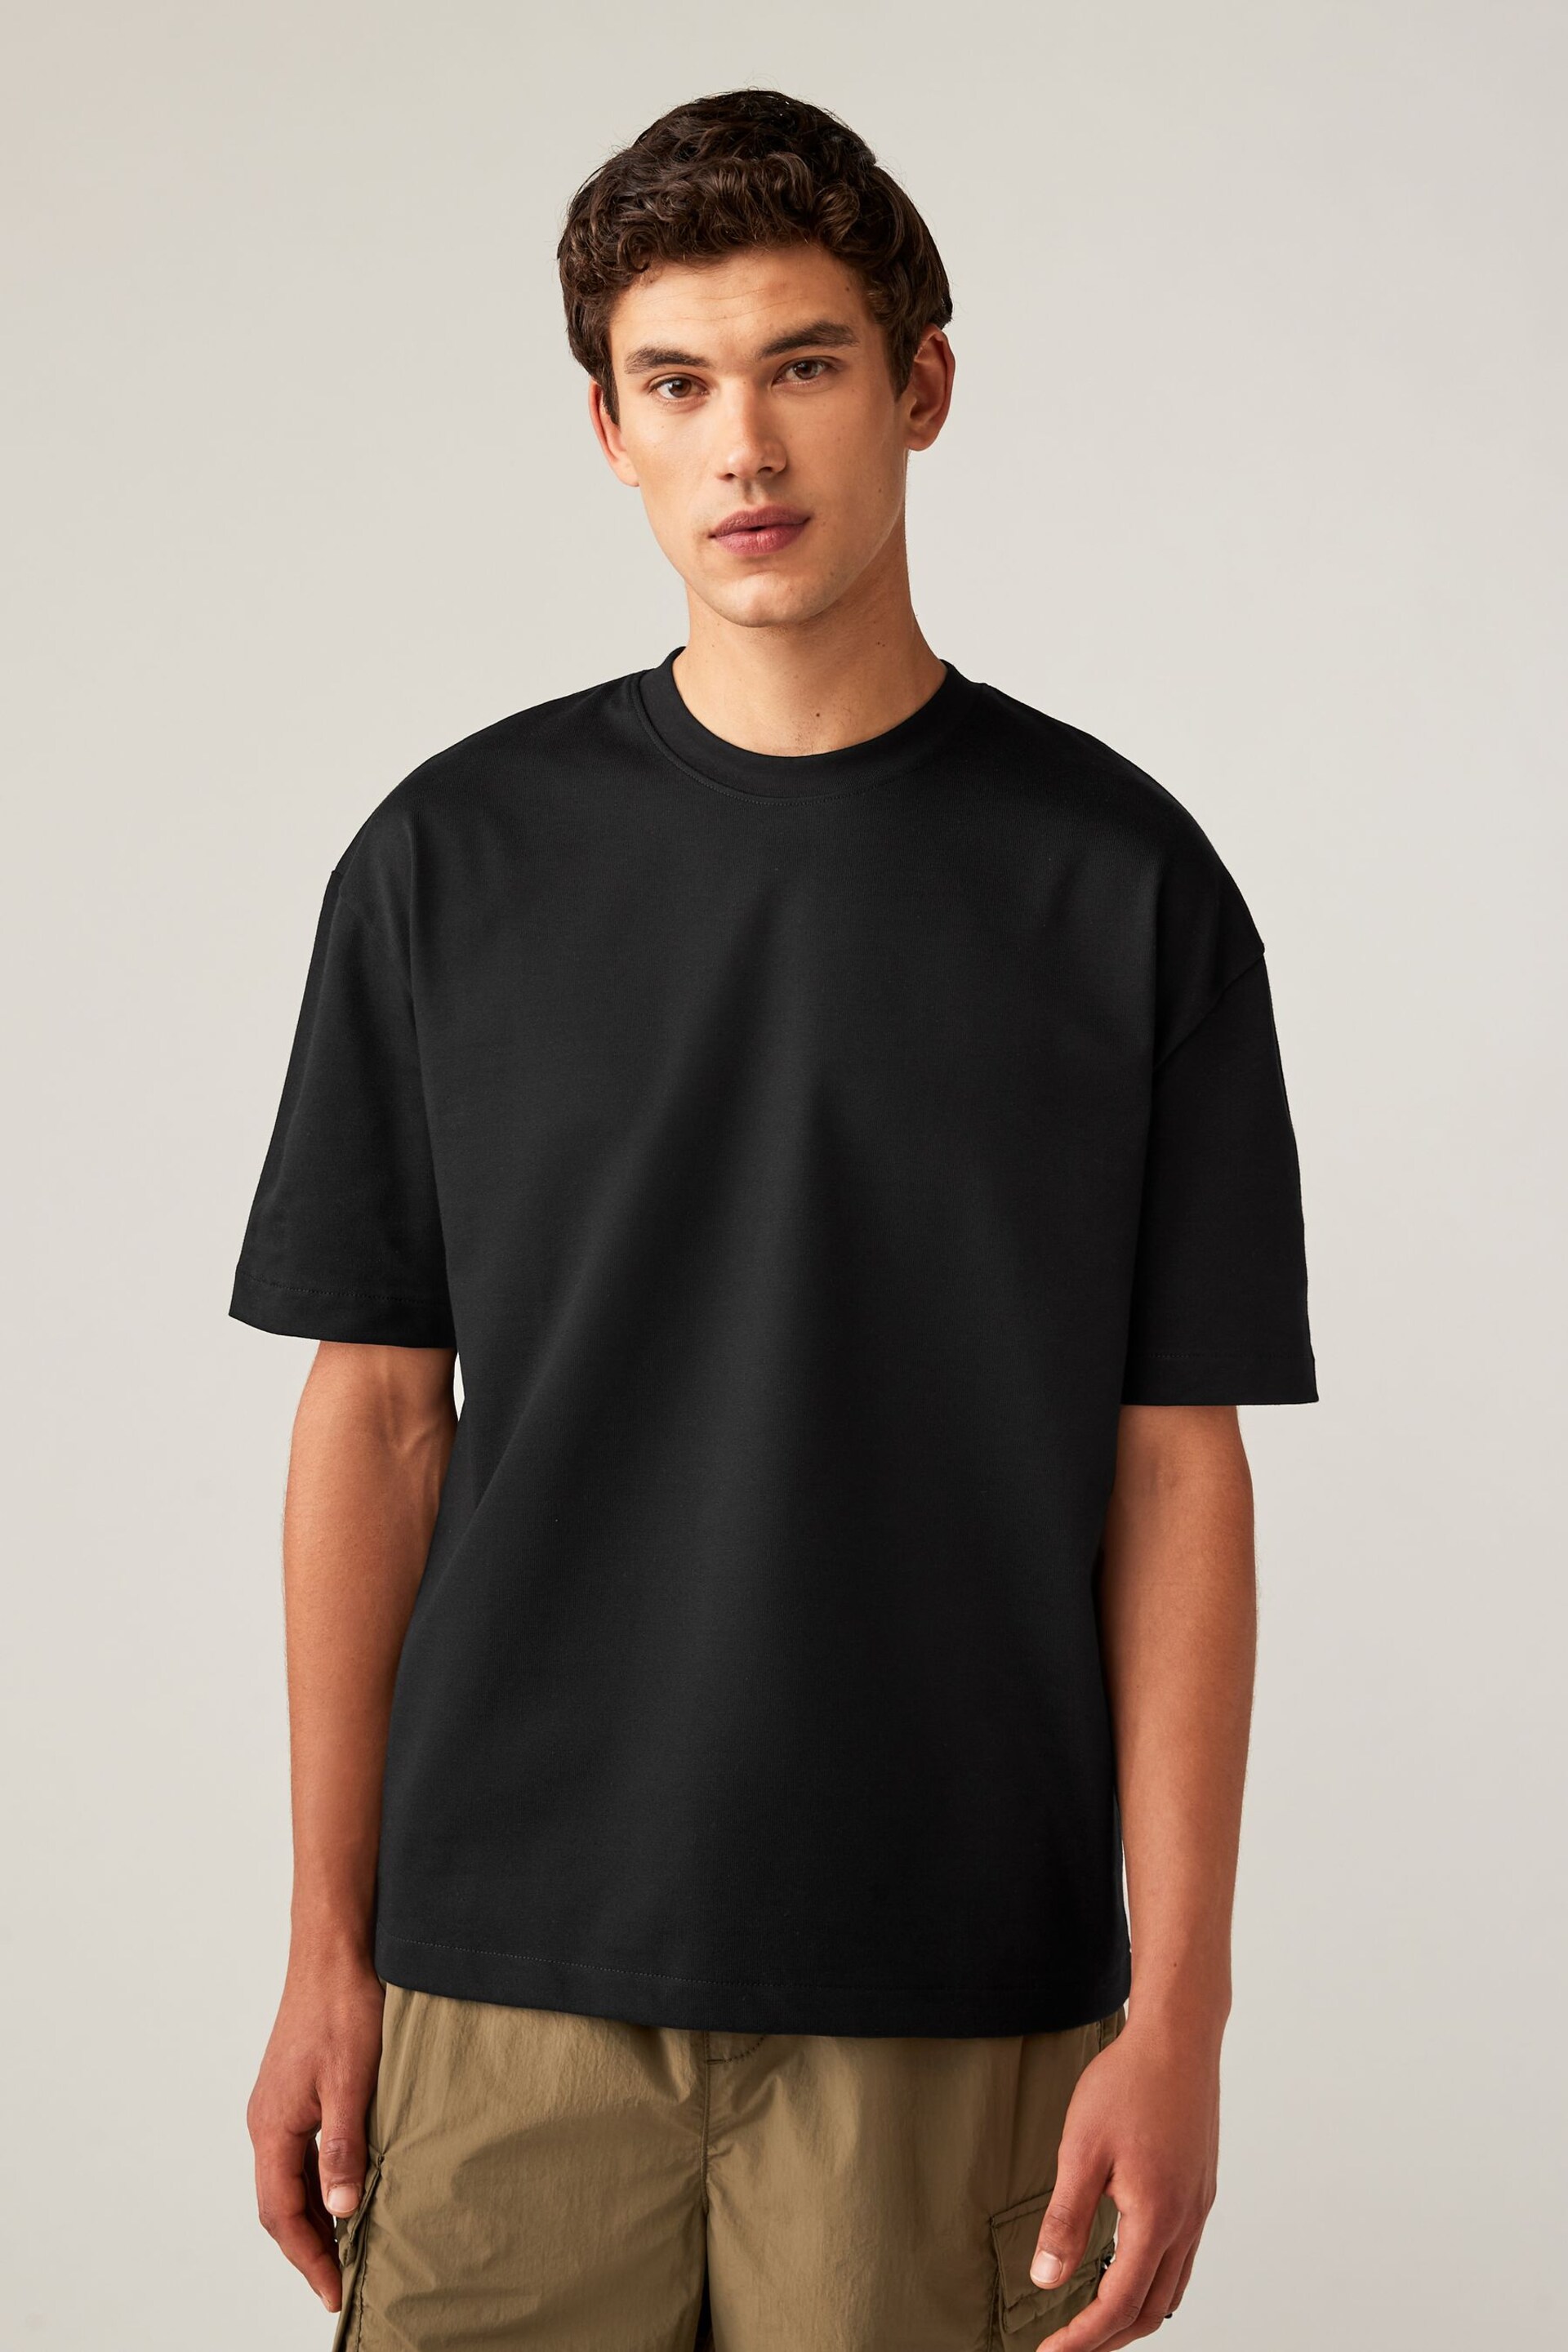 Black Relaxed Fit Heavyweight T-Shirts 3 Pack - Image 2 of 10